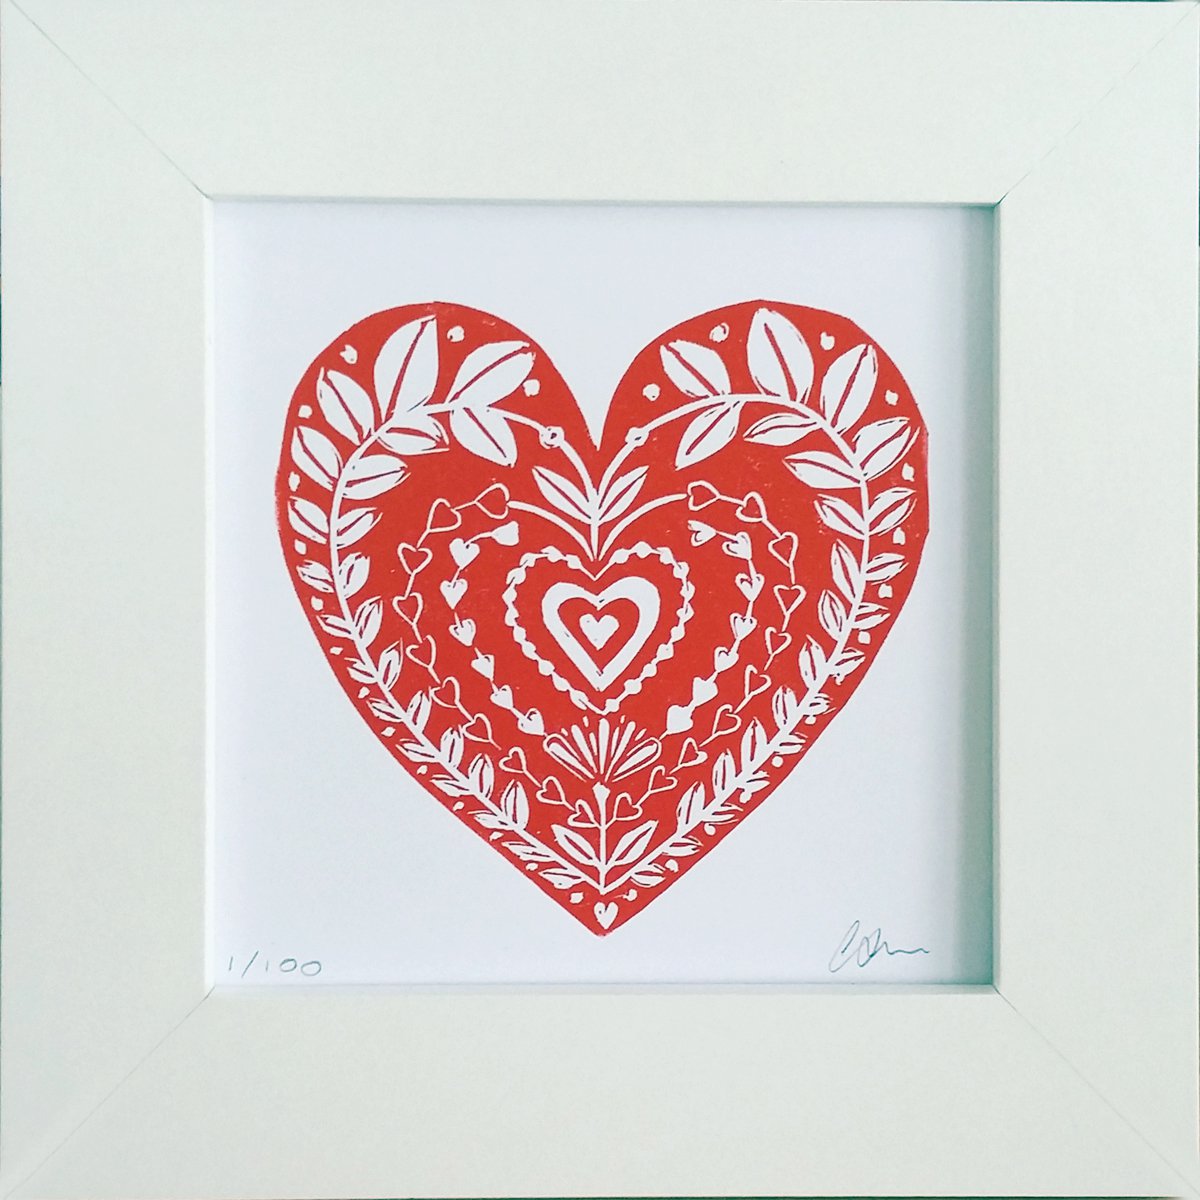 Heart - linocut print framed and ready to hang by Carolynne Coulson